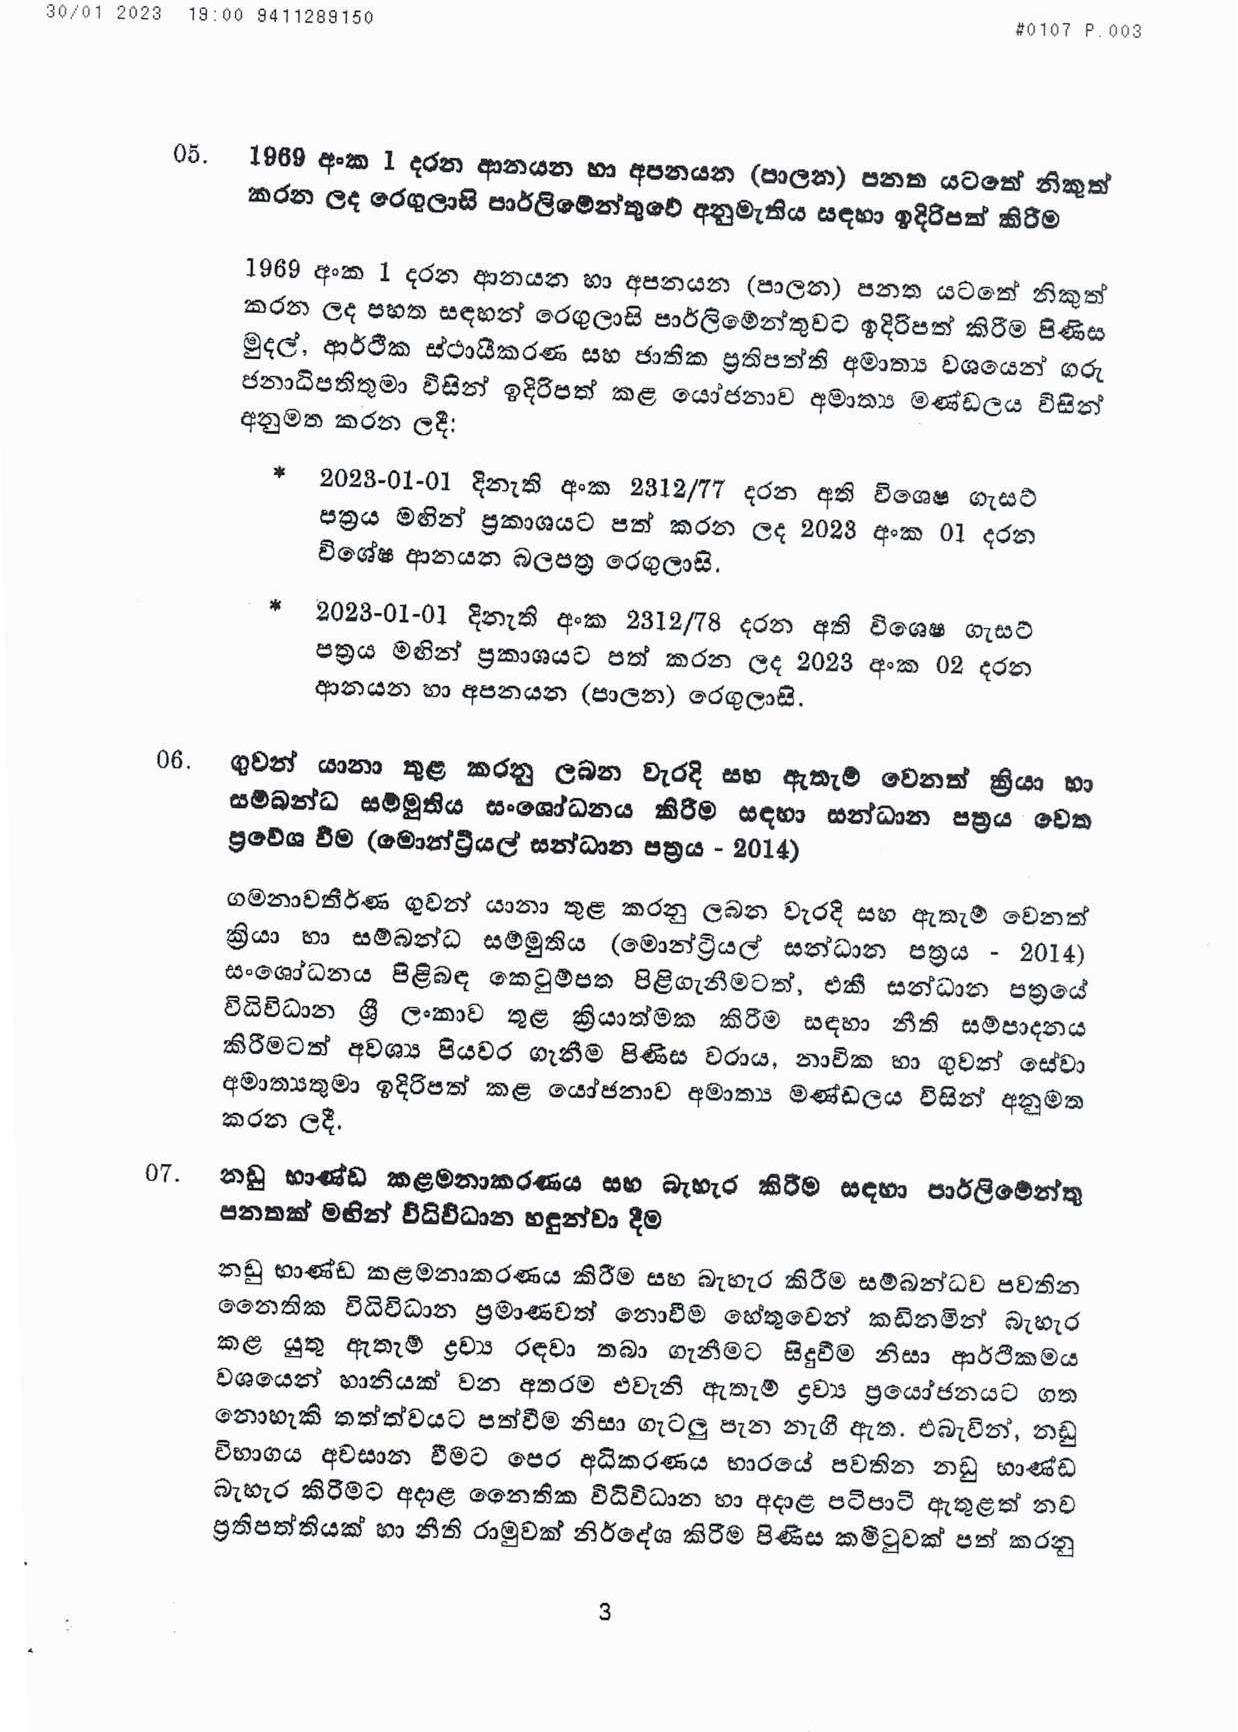 Cabinet Decisions on 30.01.2023 page 003